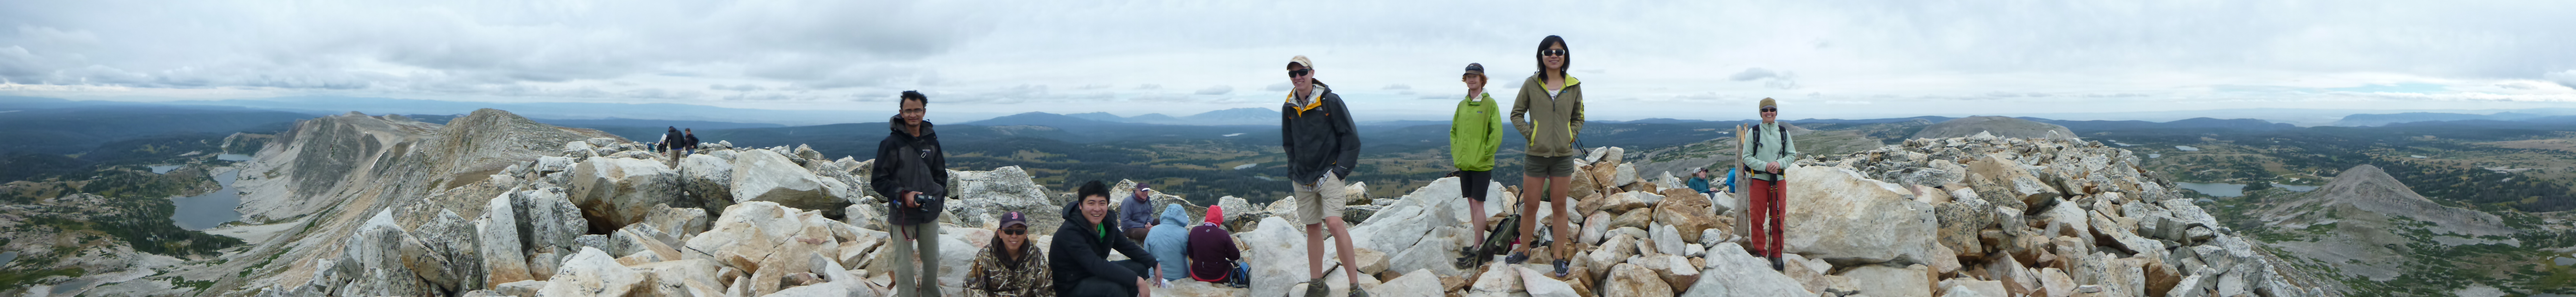 Basile group on top of the Medicine Bow peak, Summer 2013 (12,013 ft)